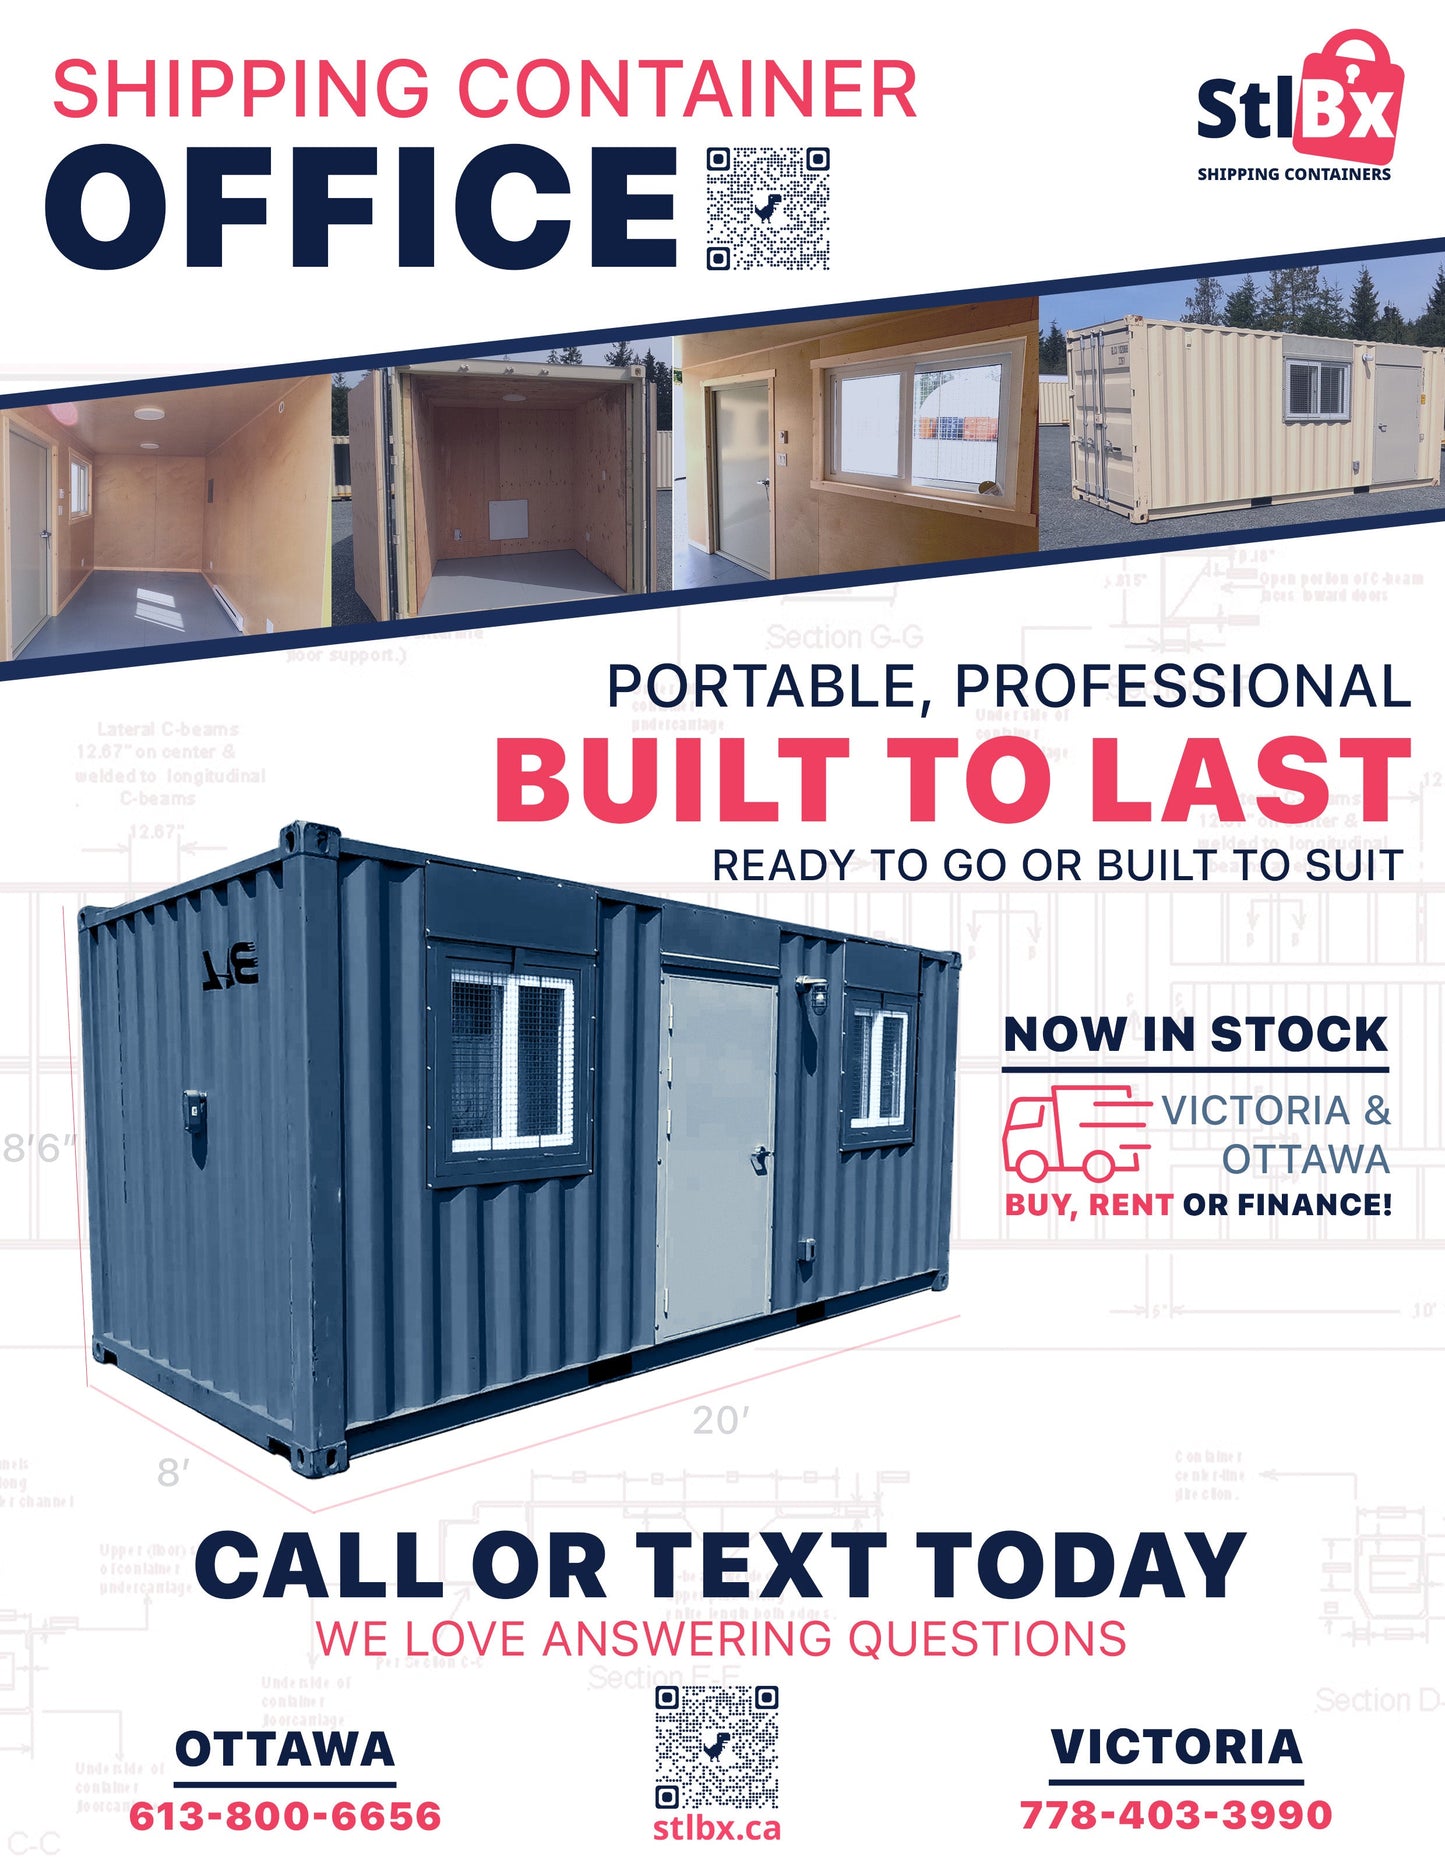 Stlbx Shipping Container Office Rental